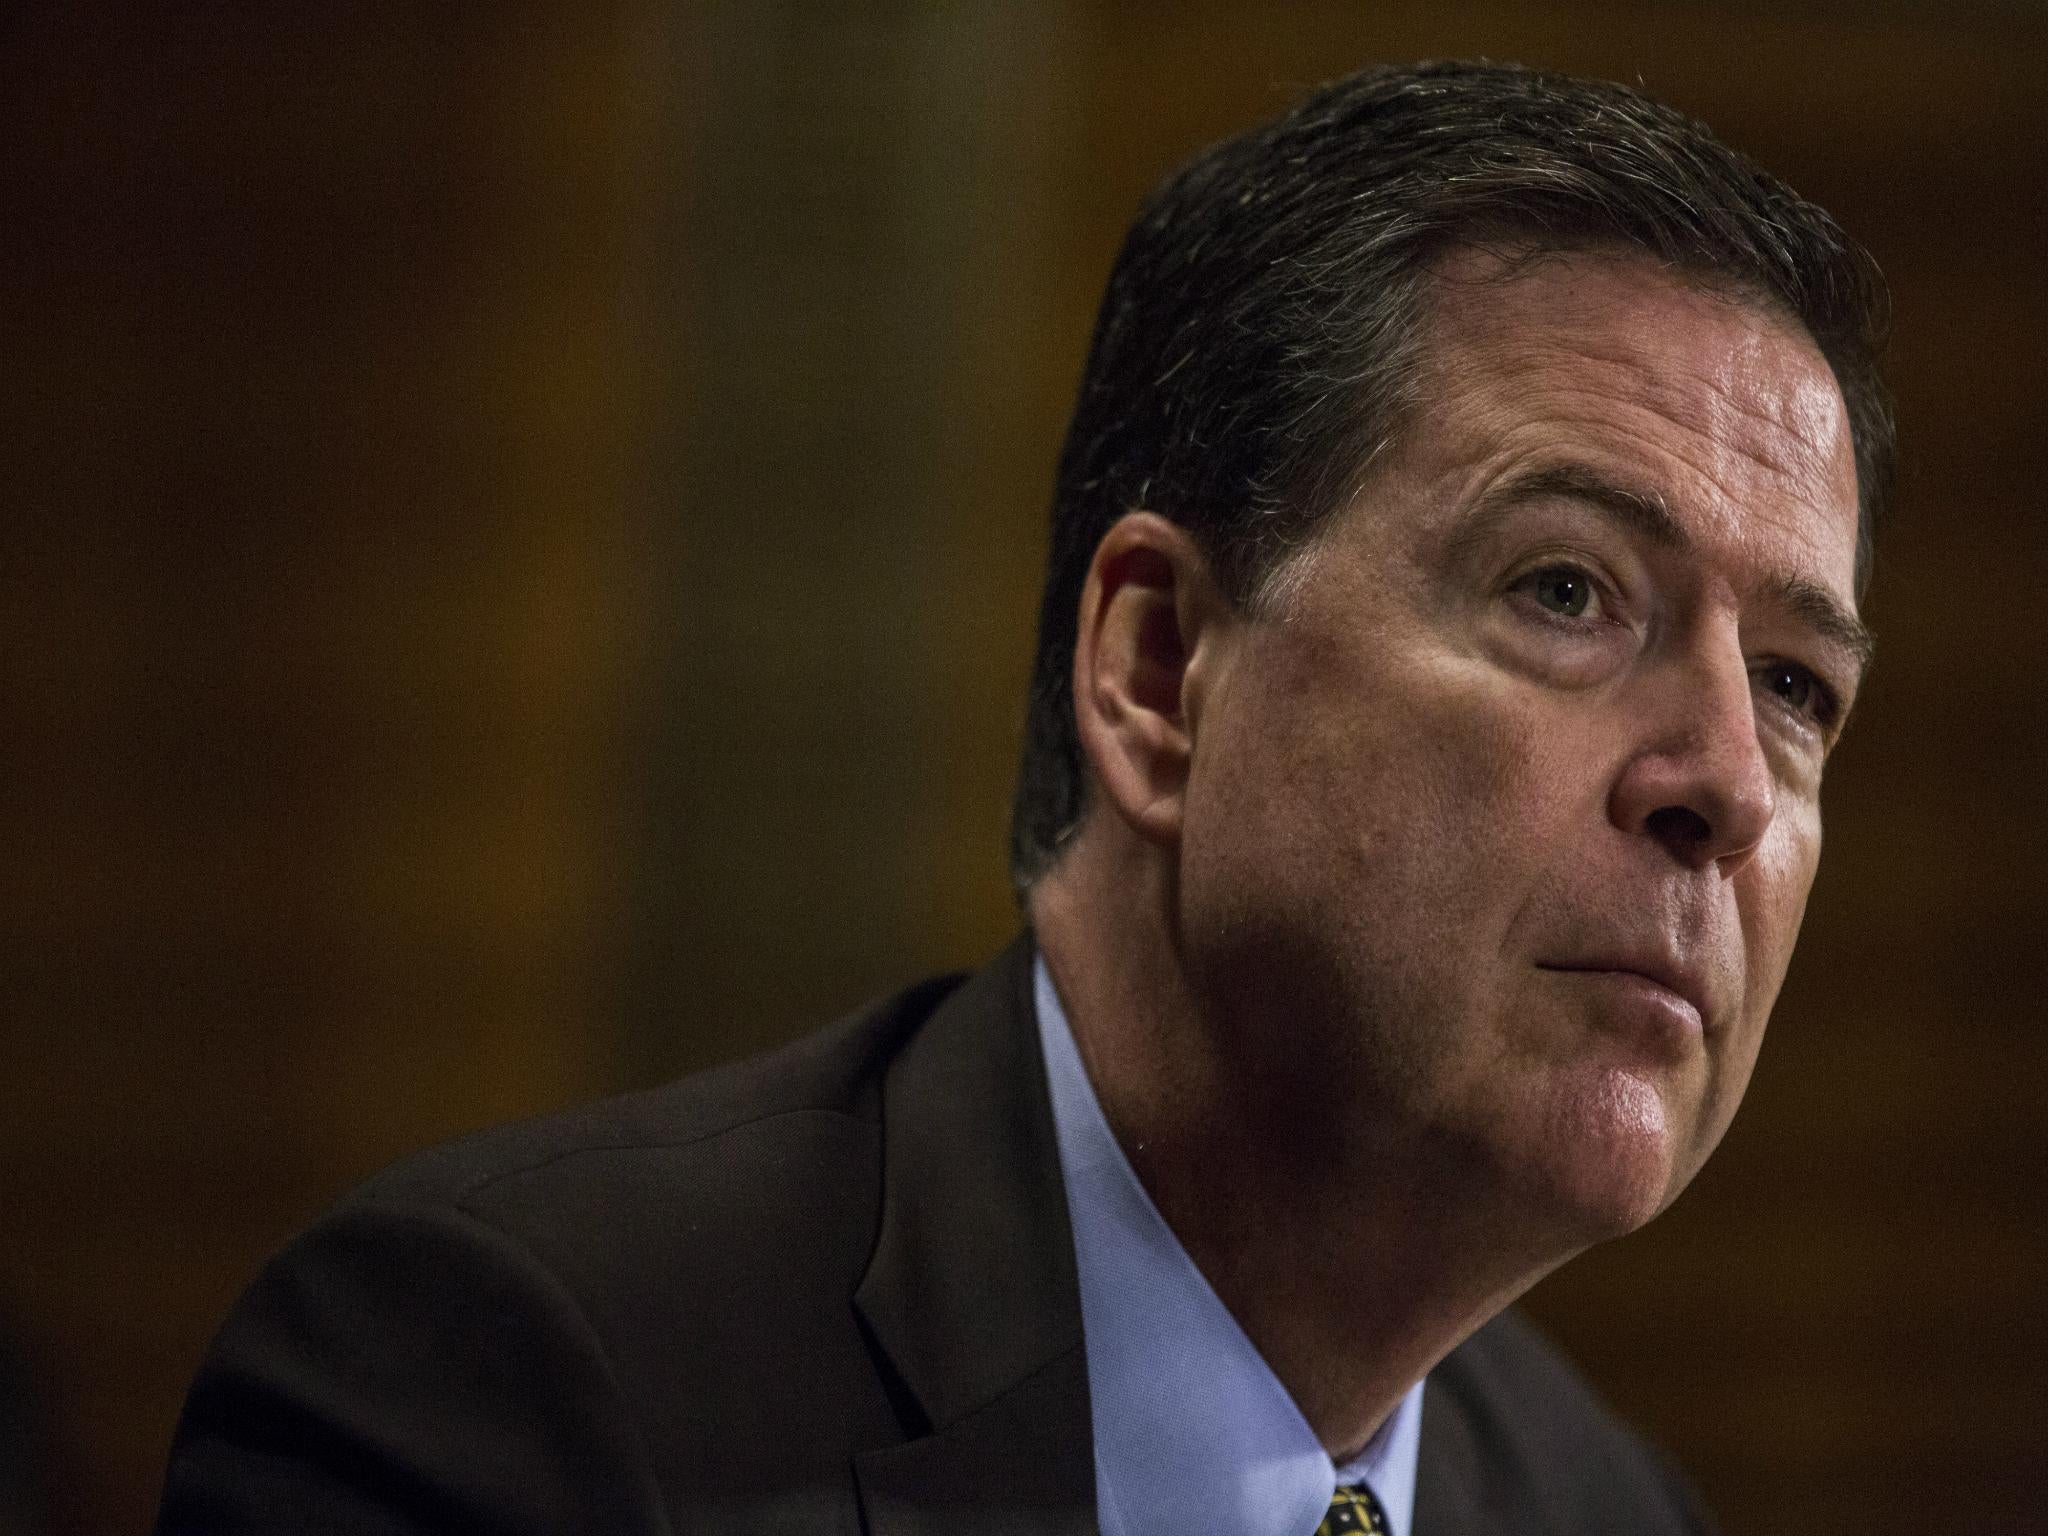 Former FBI Director James Comey says Donald Trump demanded personal loyalty to him